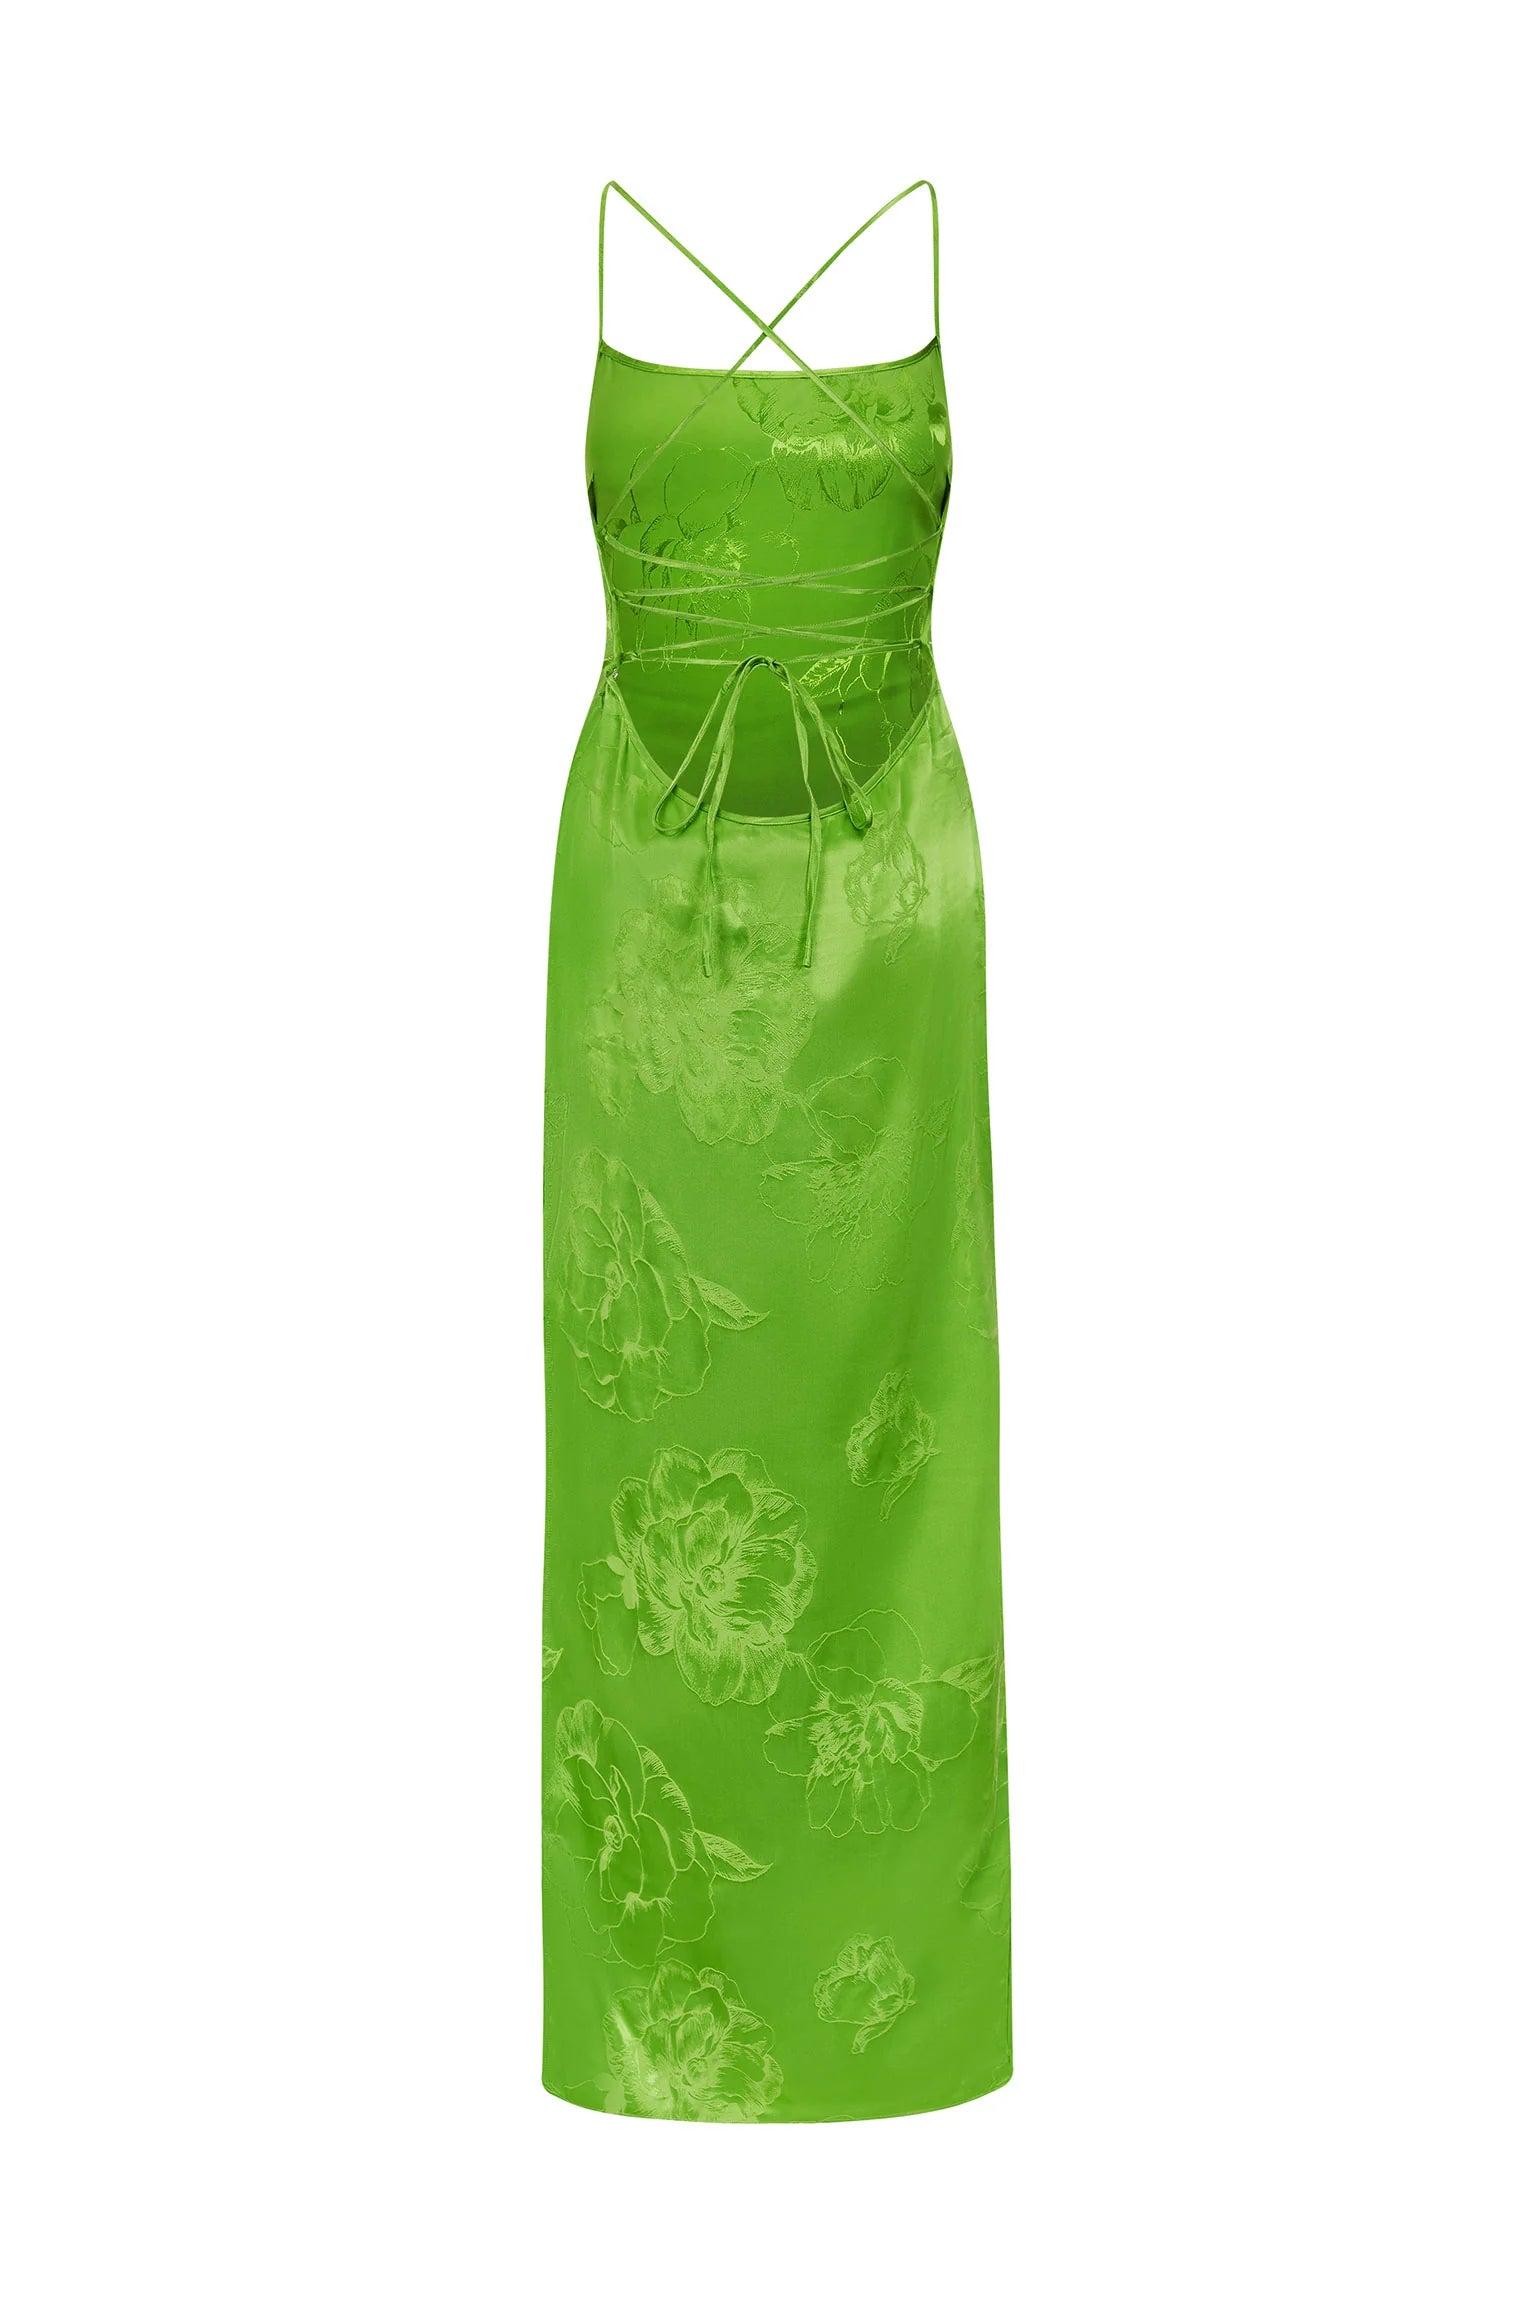 A green silk dress with a floral pattern.